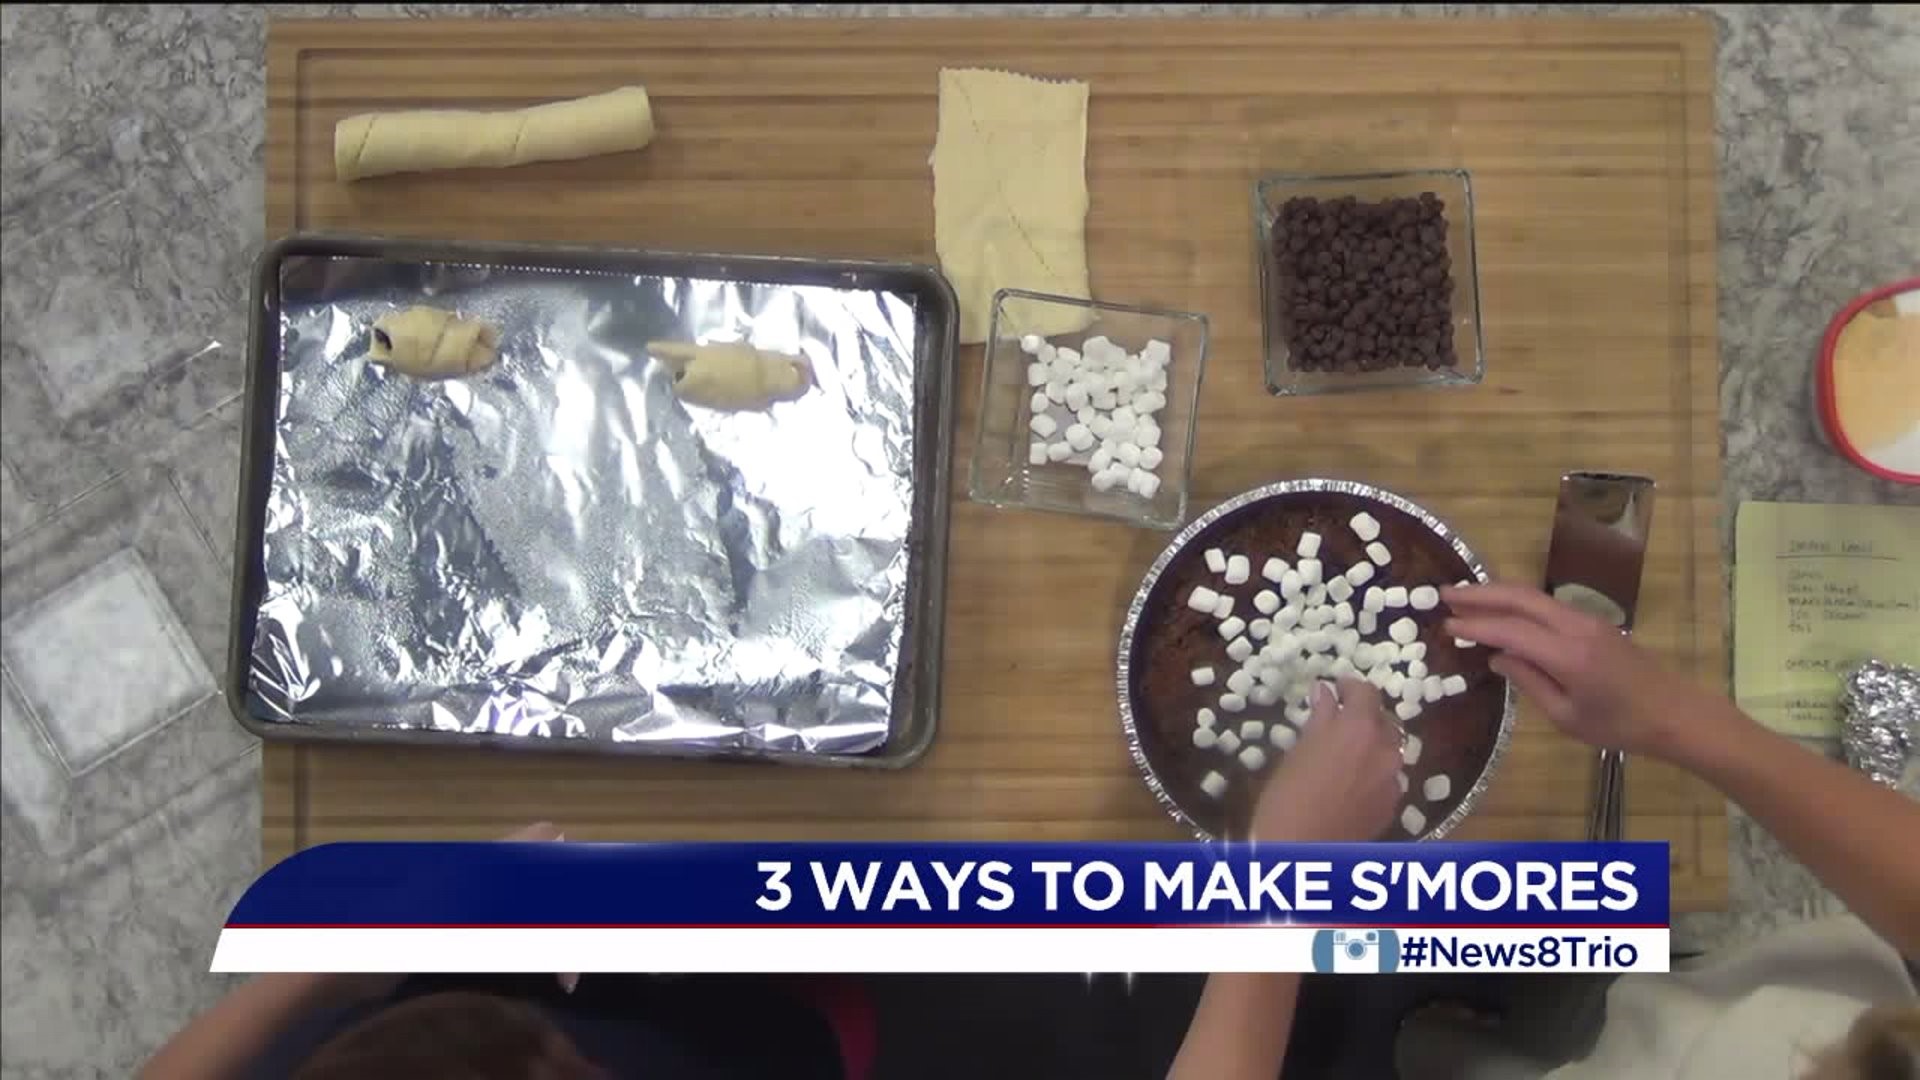 NEWS 8 TRIO `Smores without the camp fire